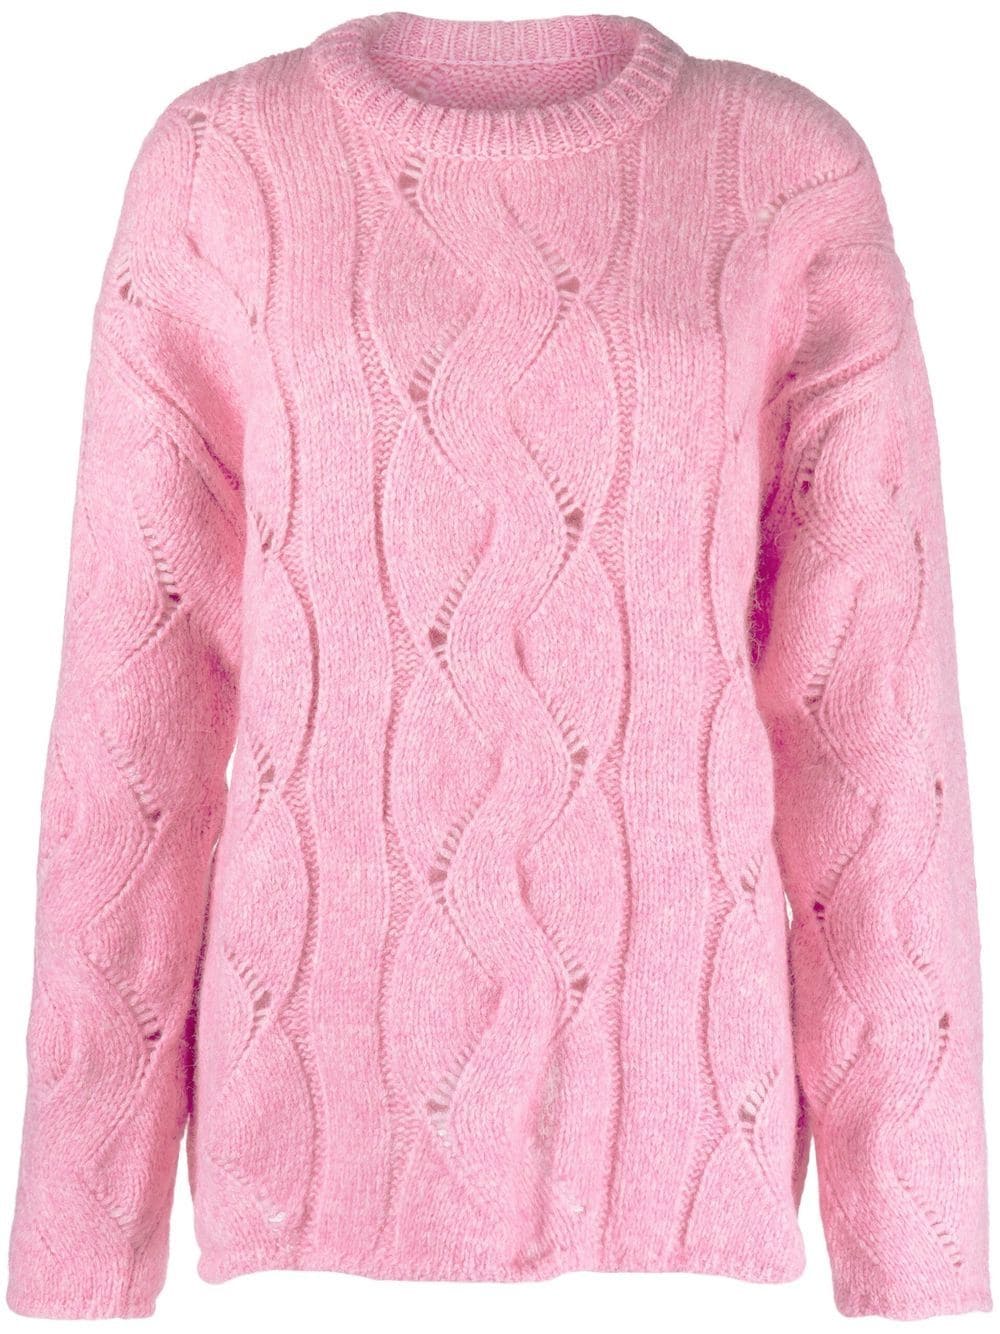 LOW CLASSIC LONG-SLEEVE KNITTED JUMPER